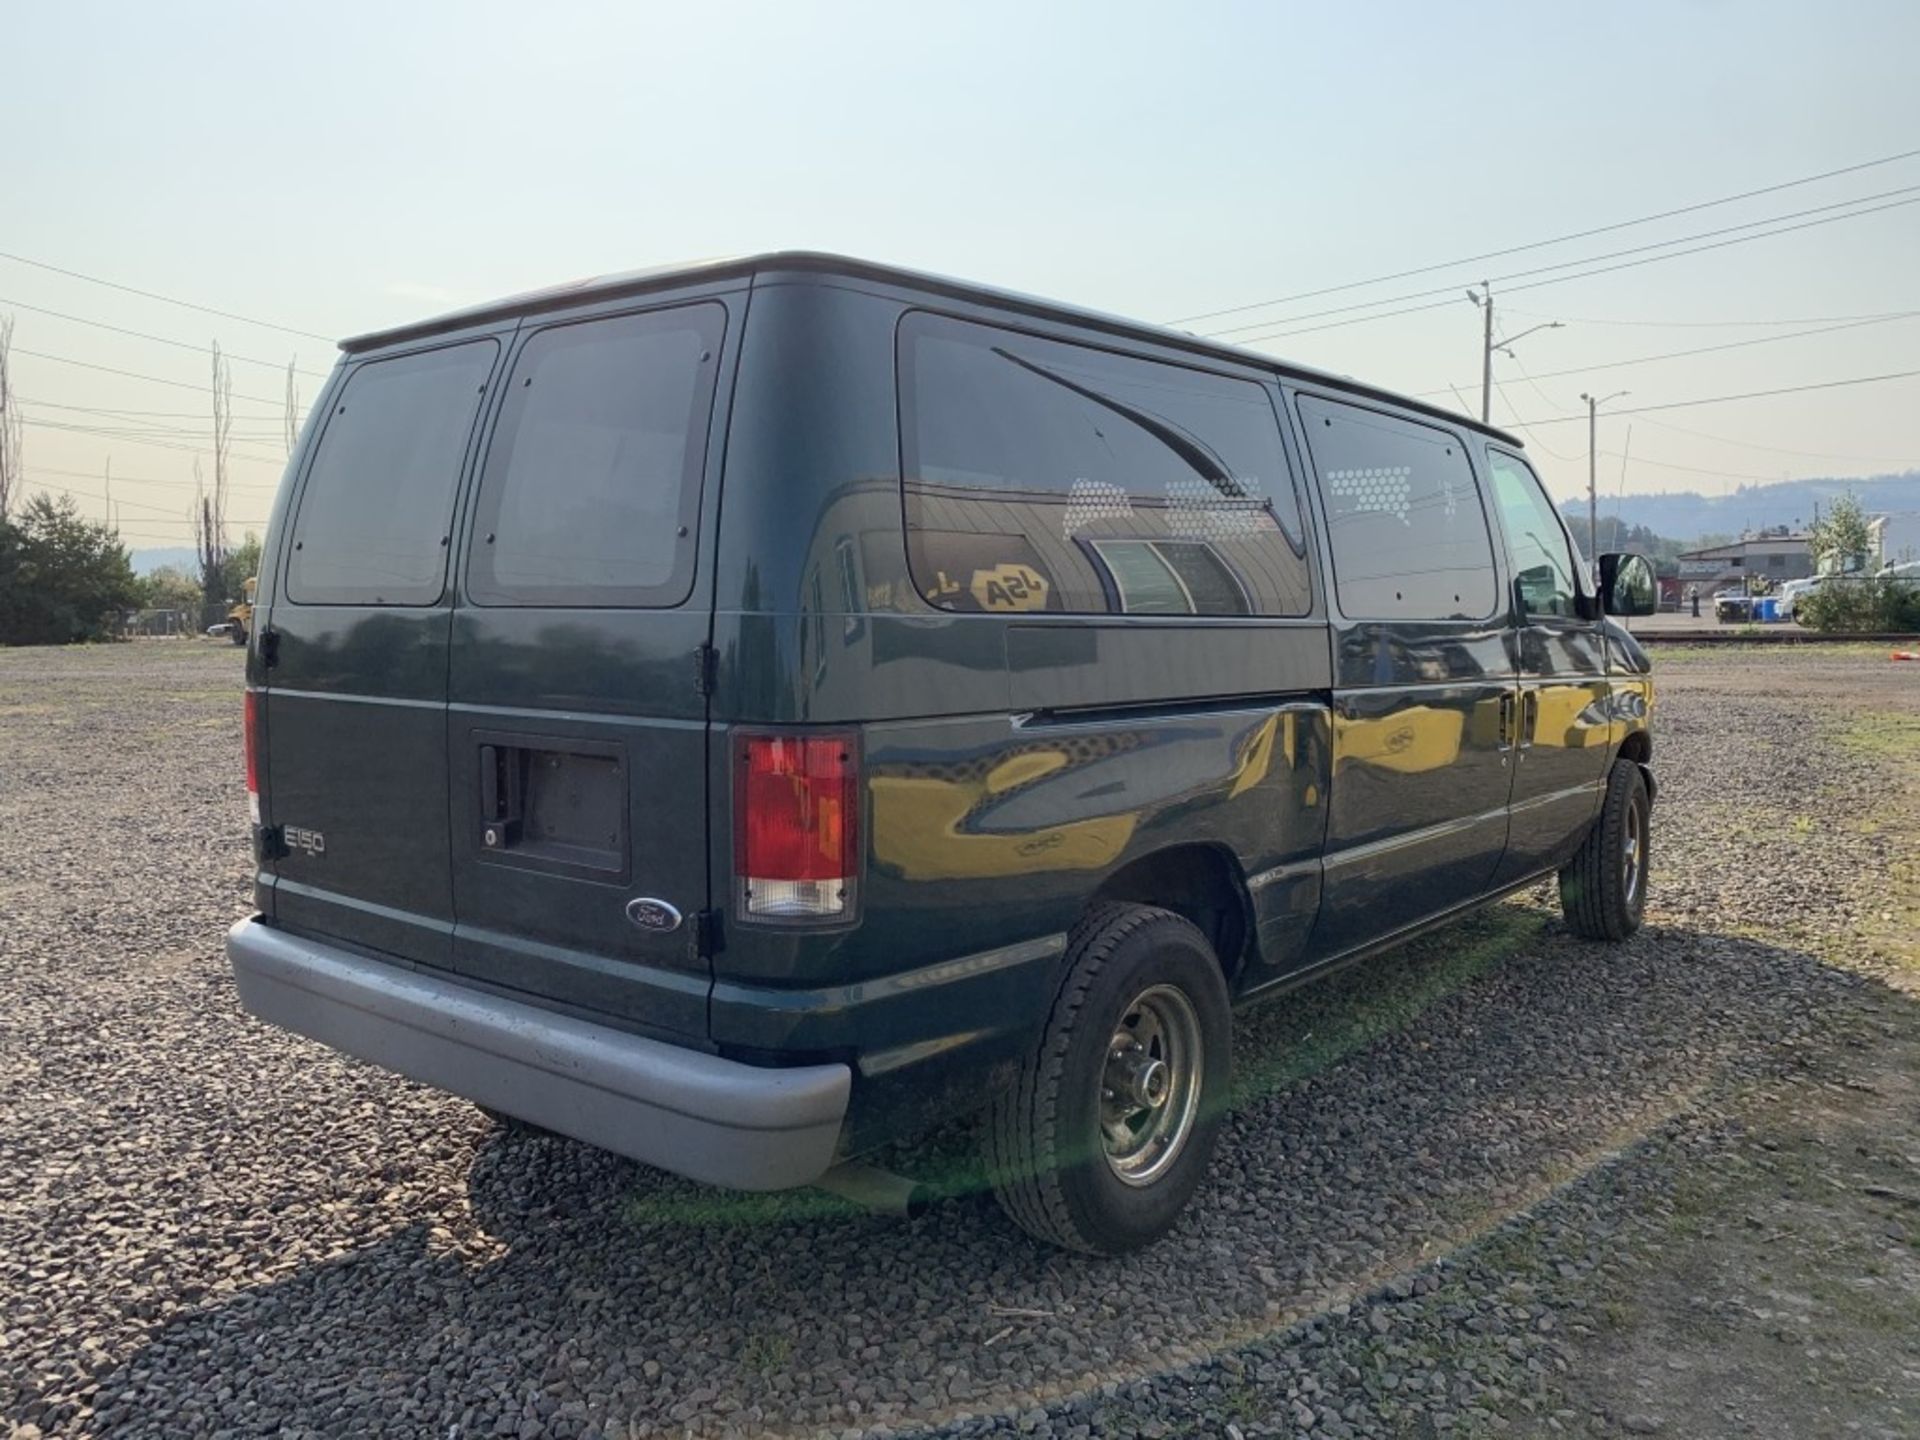 1999 Ford E150 Cargo Van - Image 3 of 14